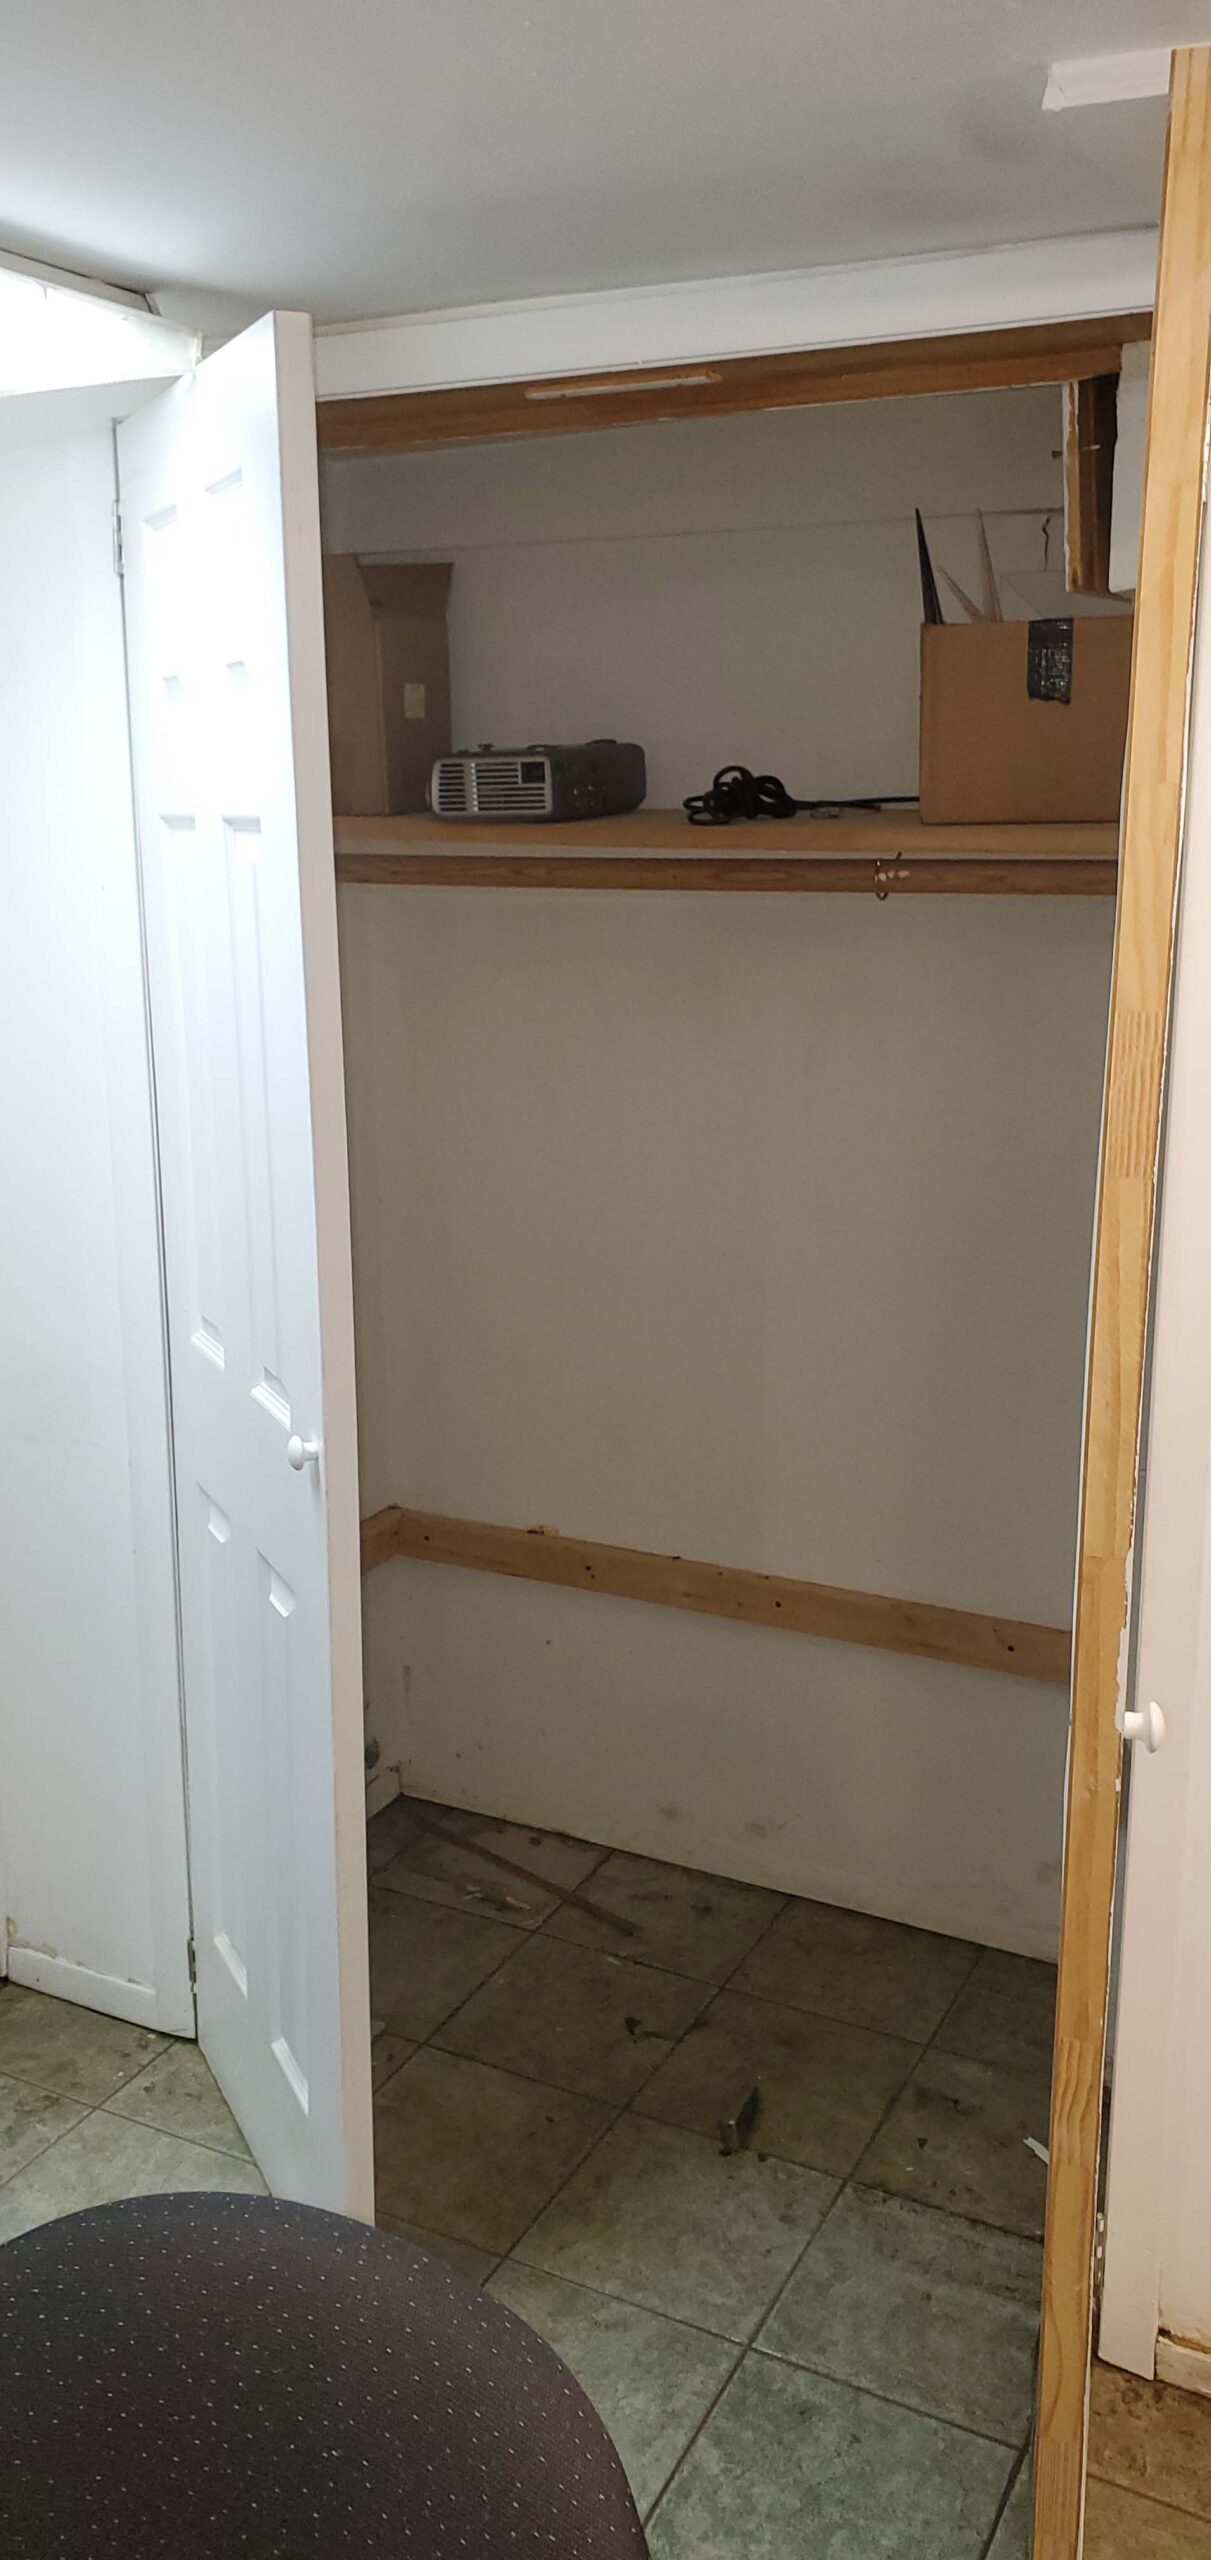 water damage done to closet